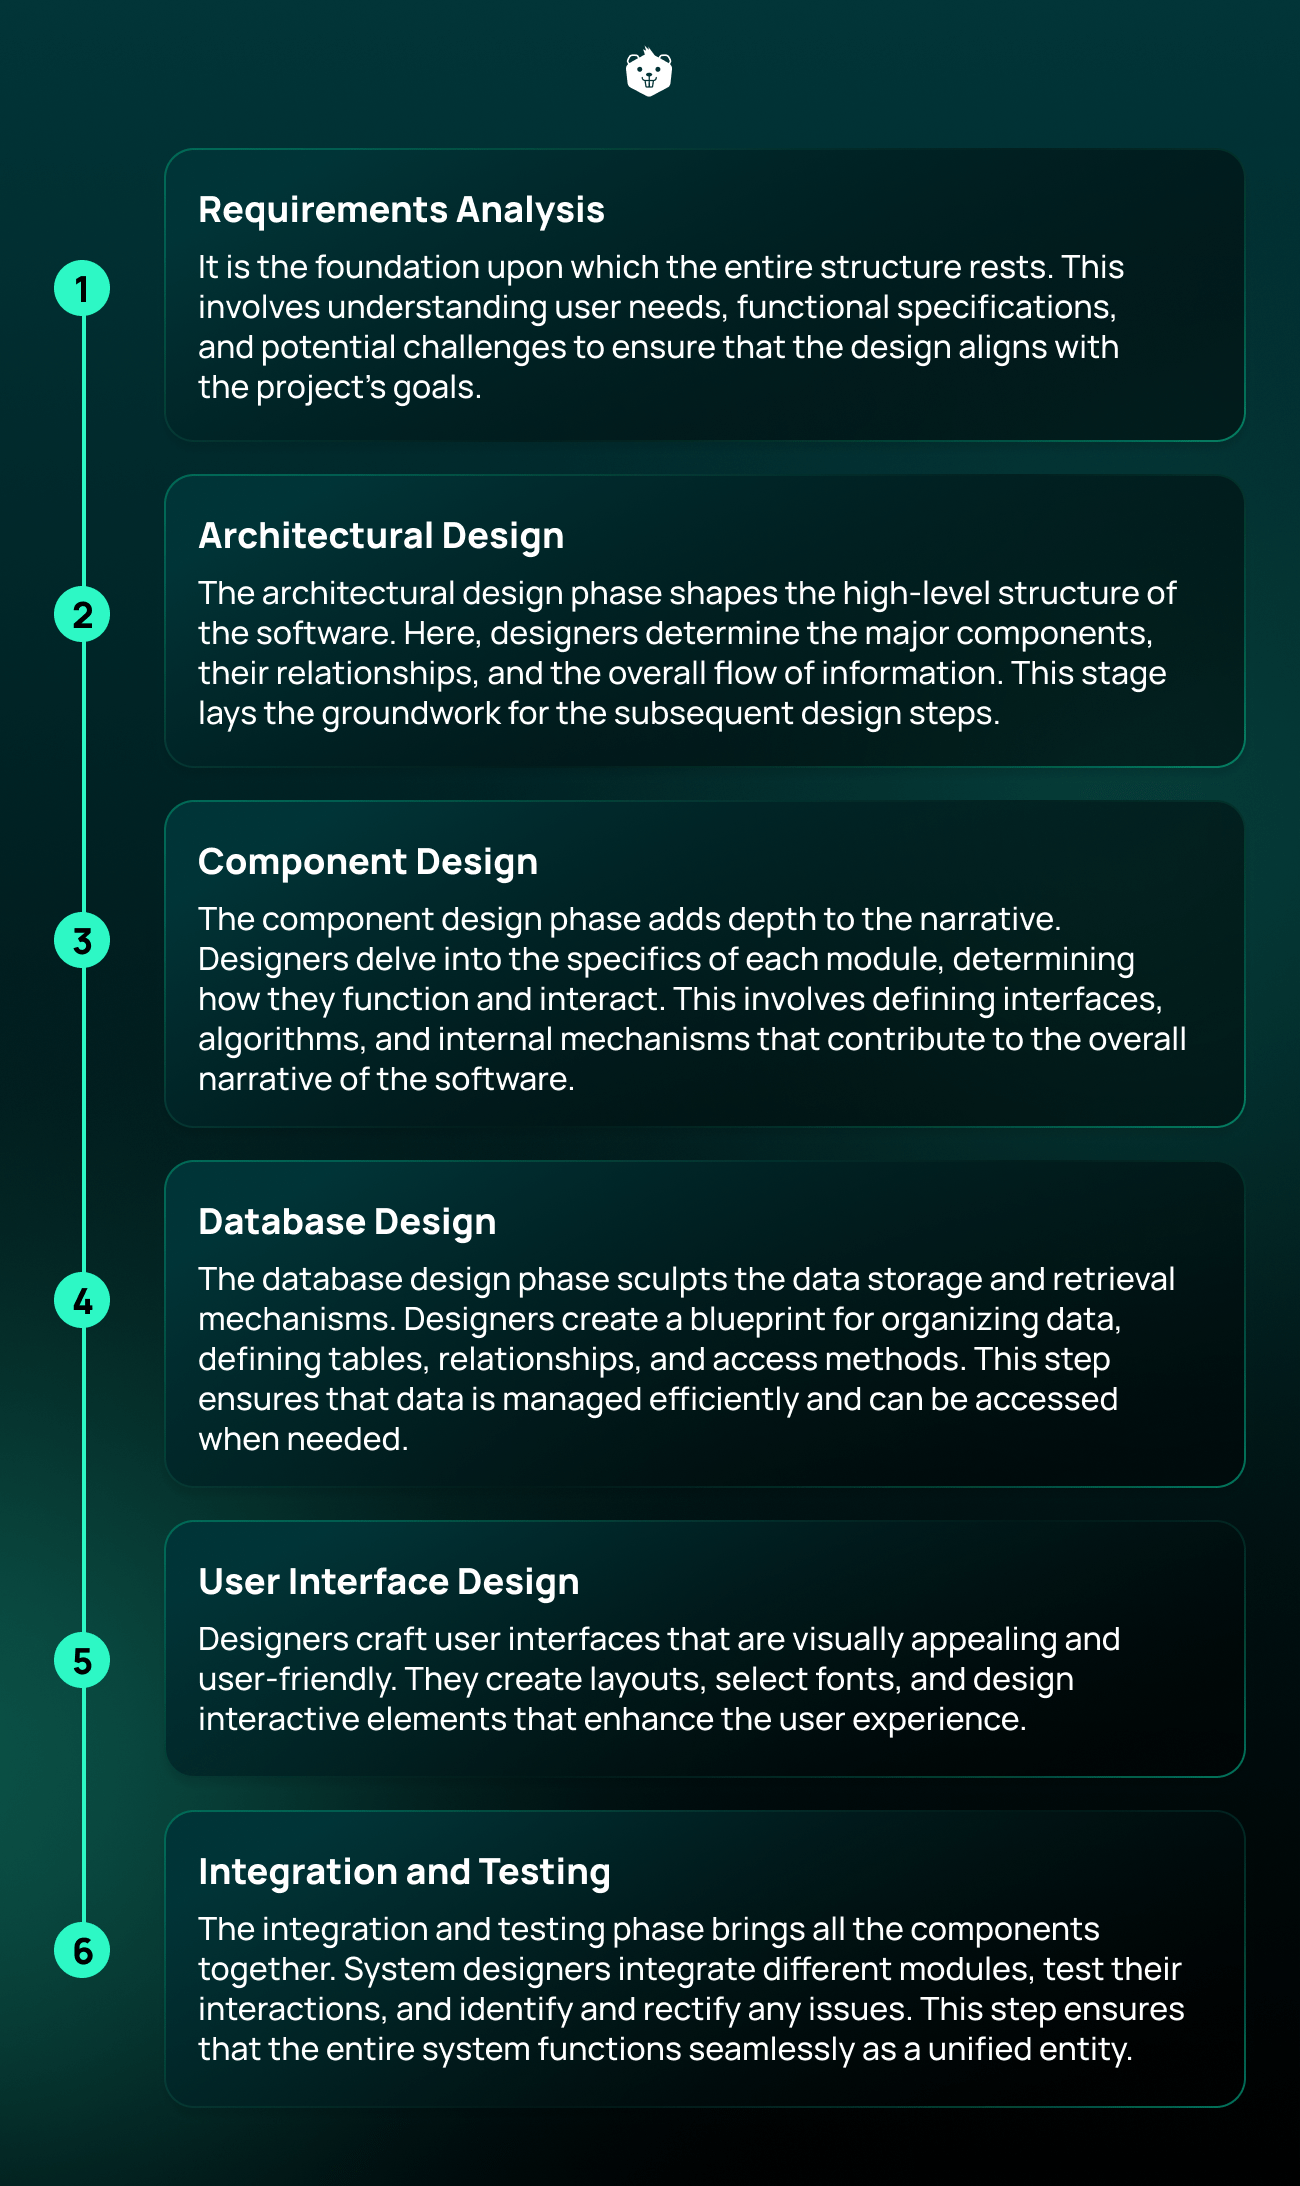 The Process of System Design